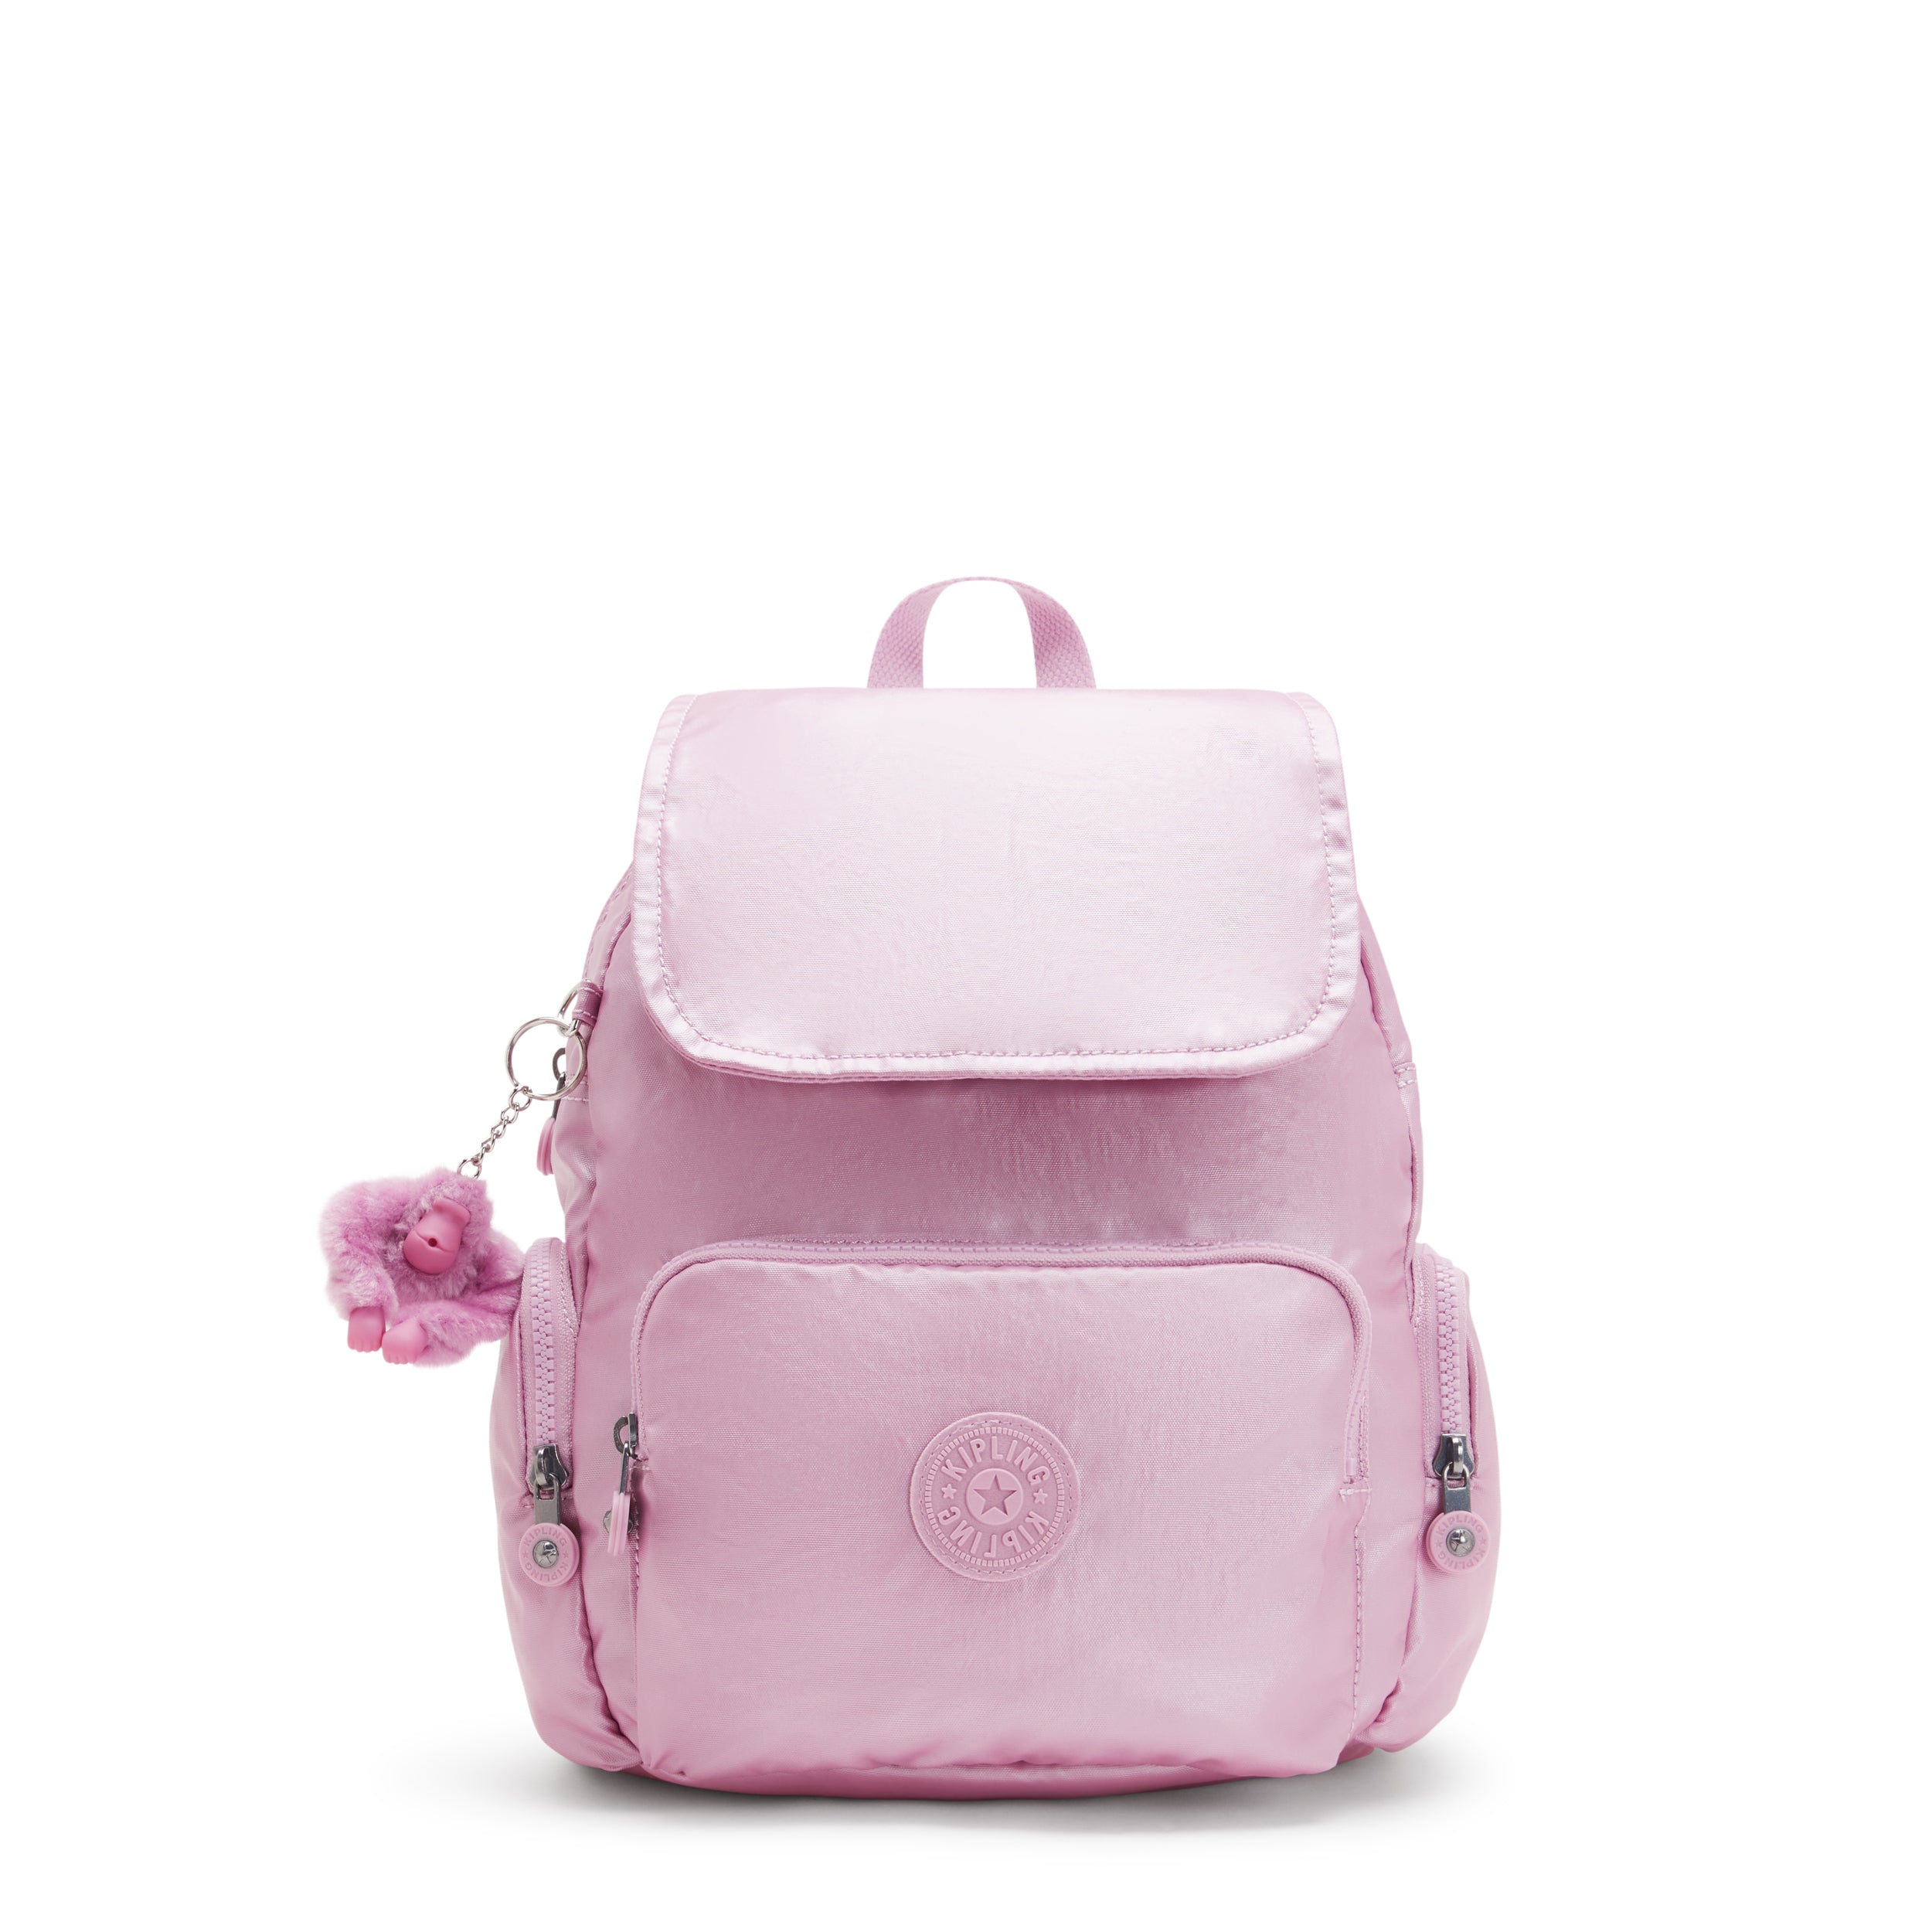 KIPLING-City Zip S-Small Backpack with Adjustable Straps-Metallic Lilac-I5634-F4D